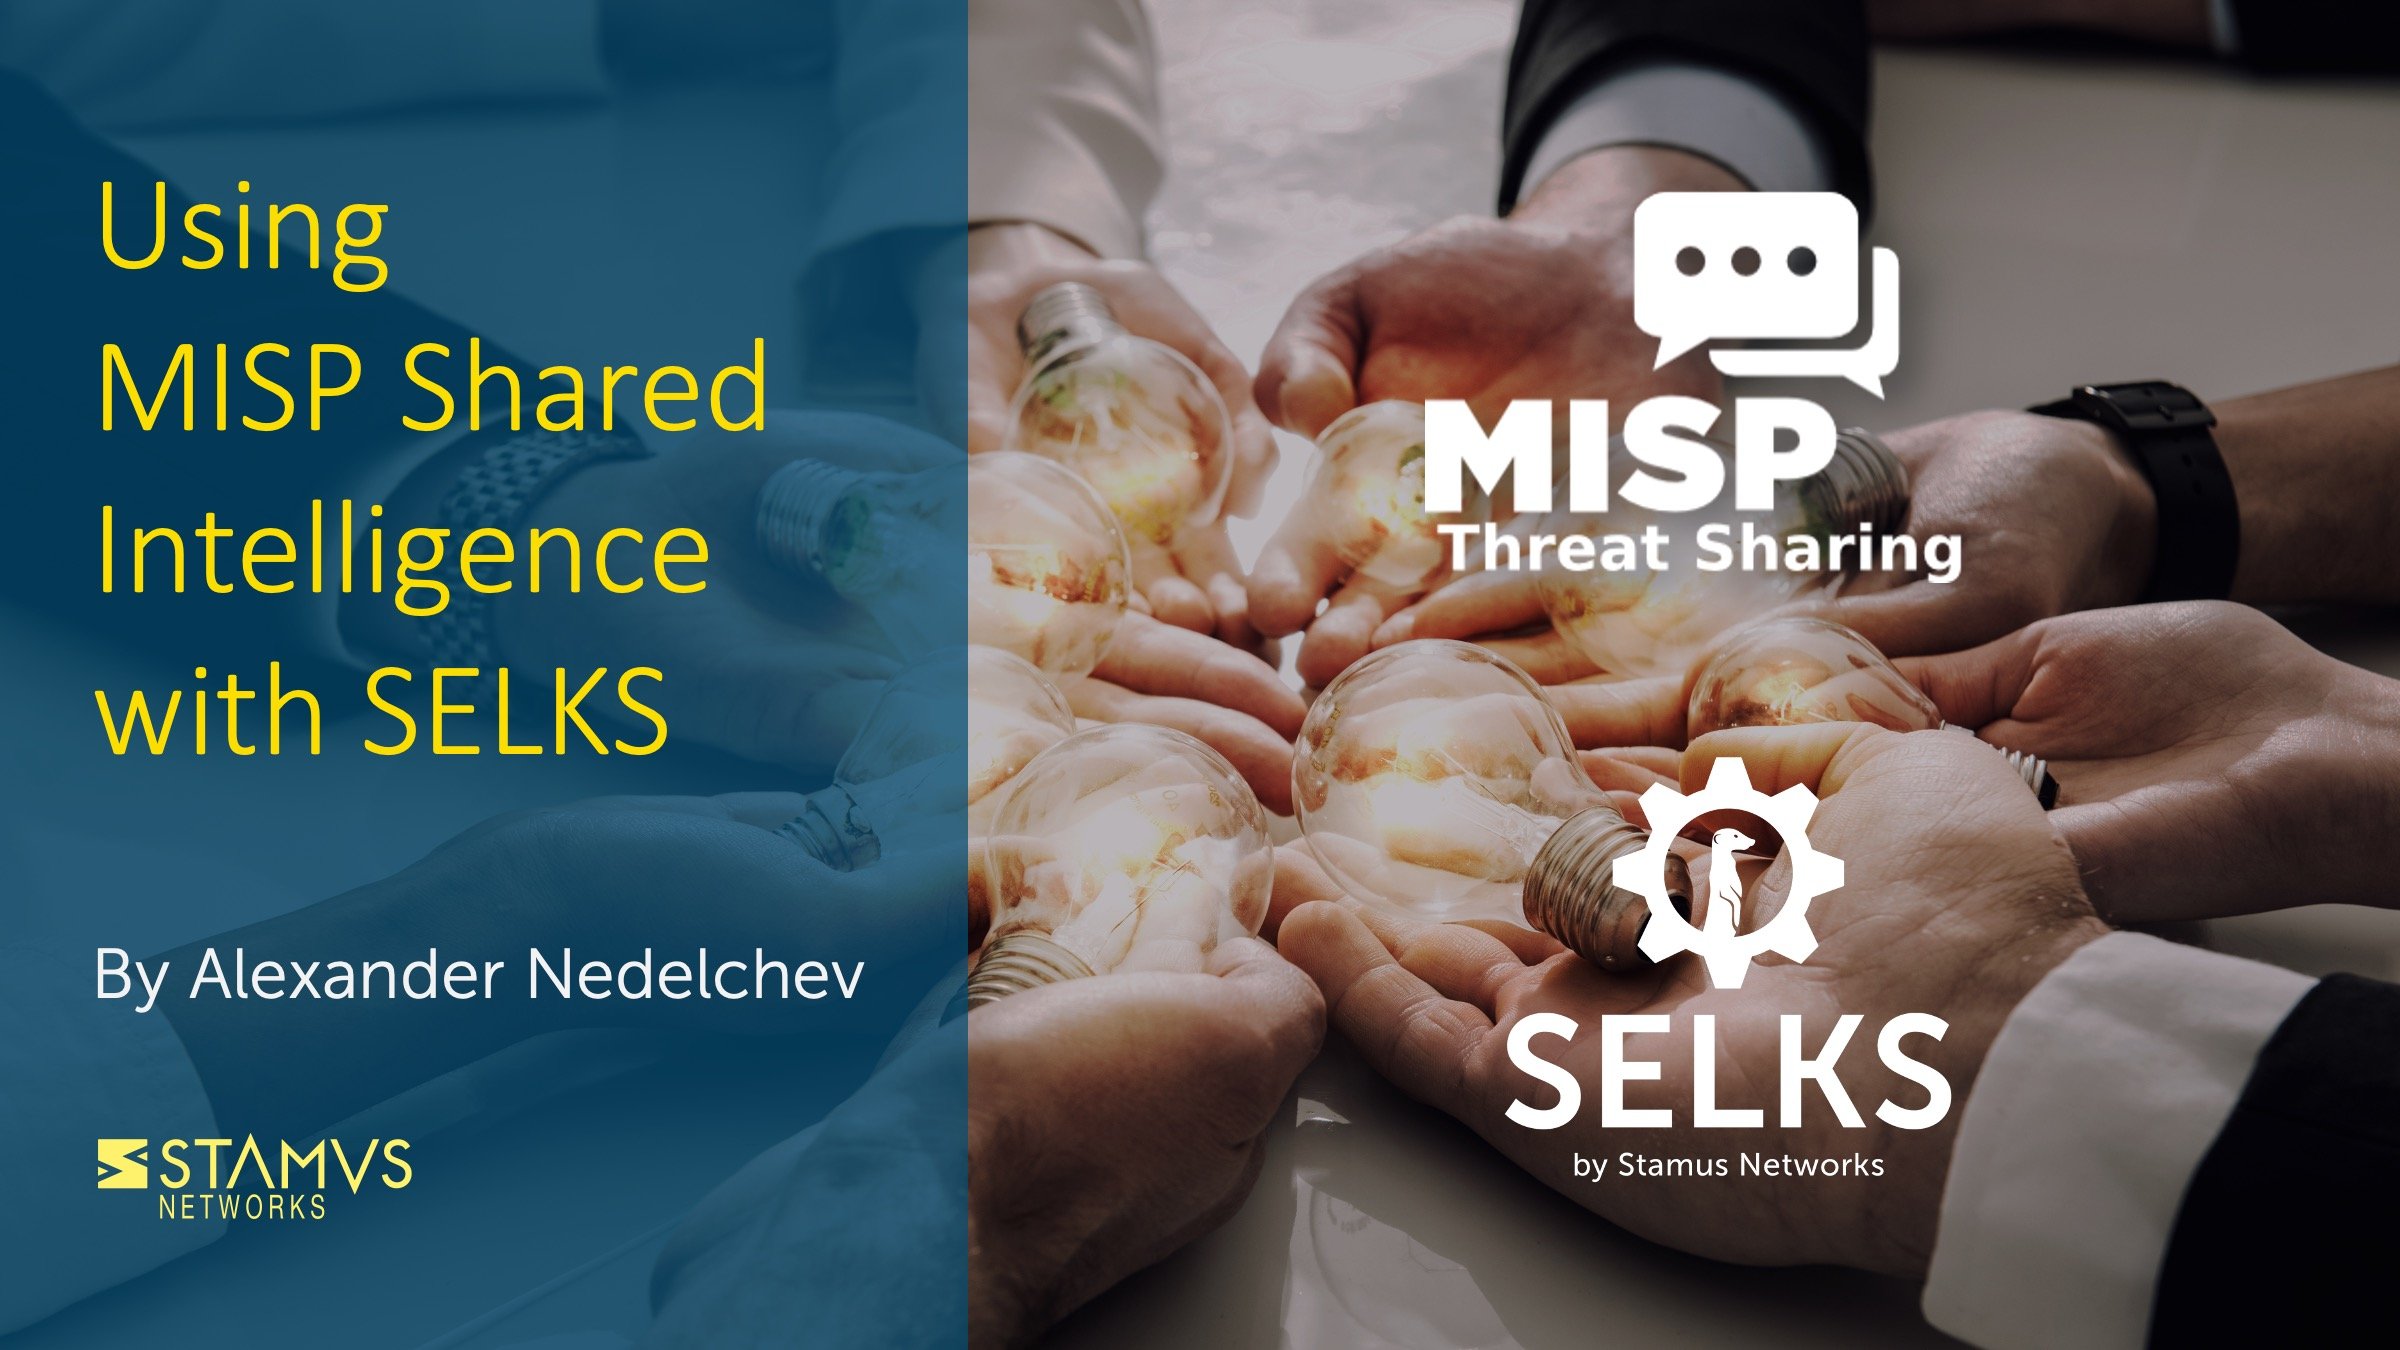 Using MISP Shared Intelligence with SELKS by Alexander Nedelchev